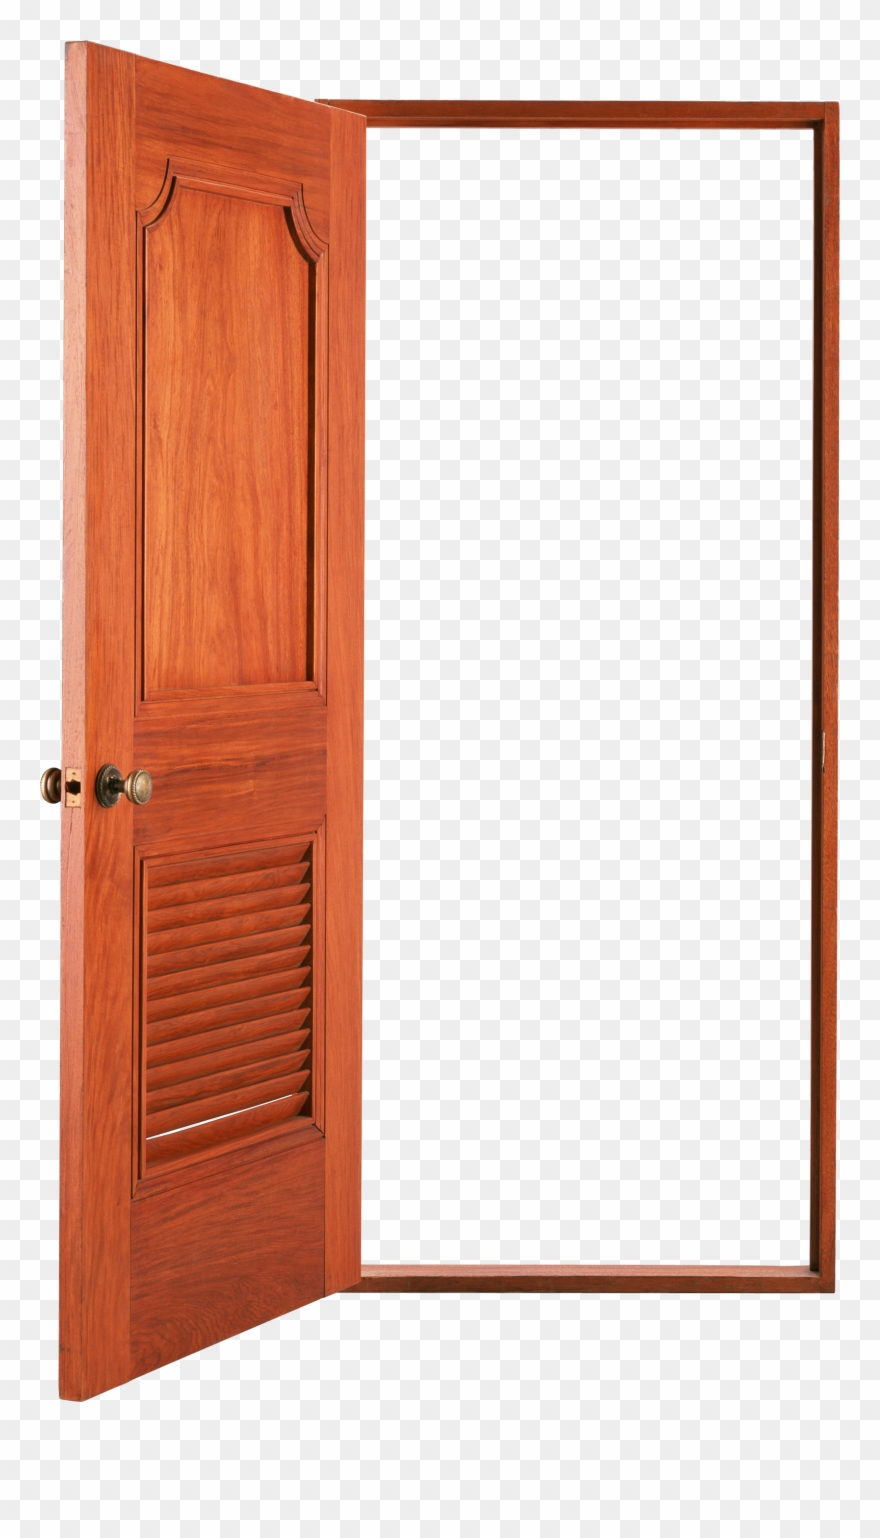 Open Door Png Clip Art For A New Year S Resolution.